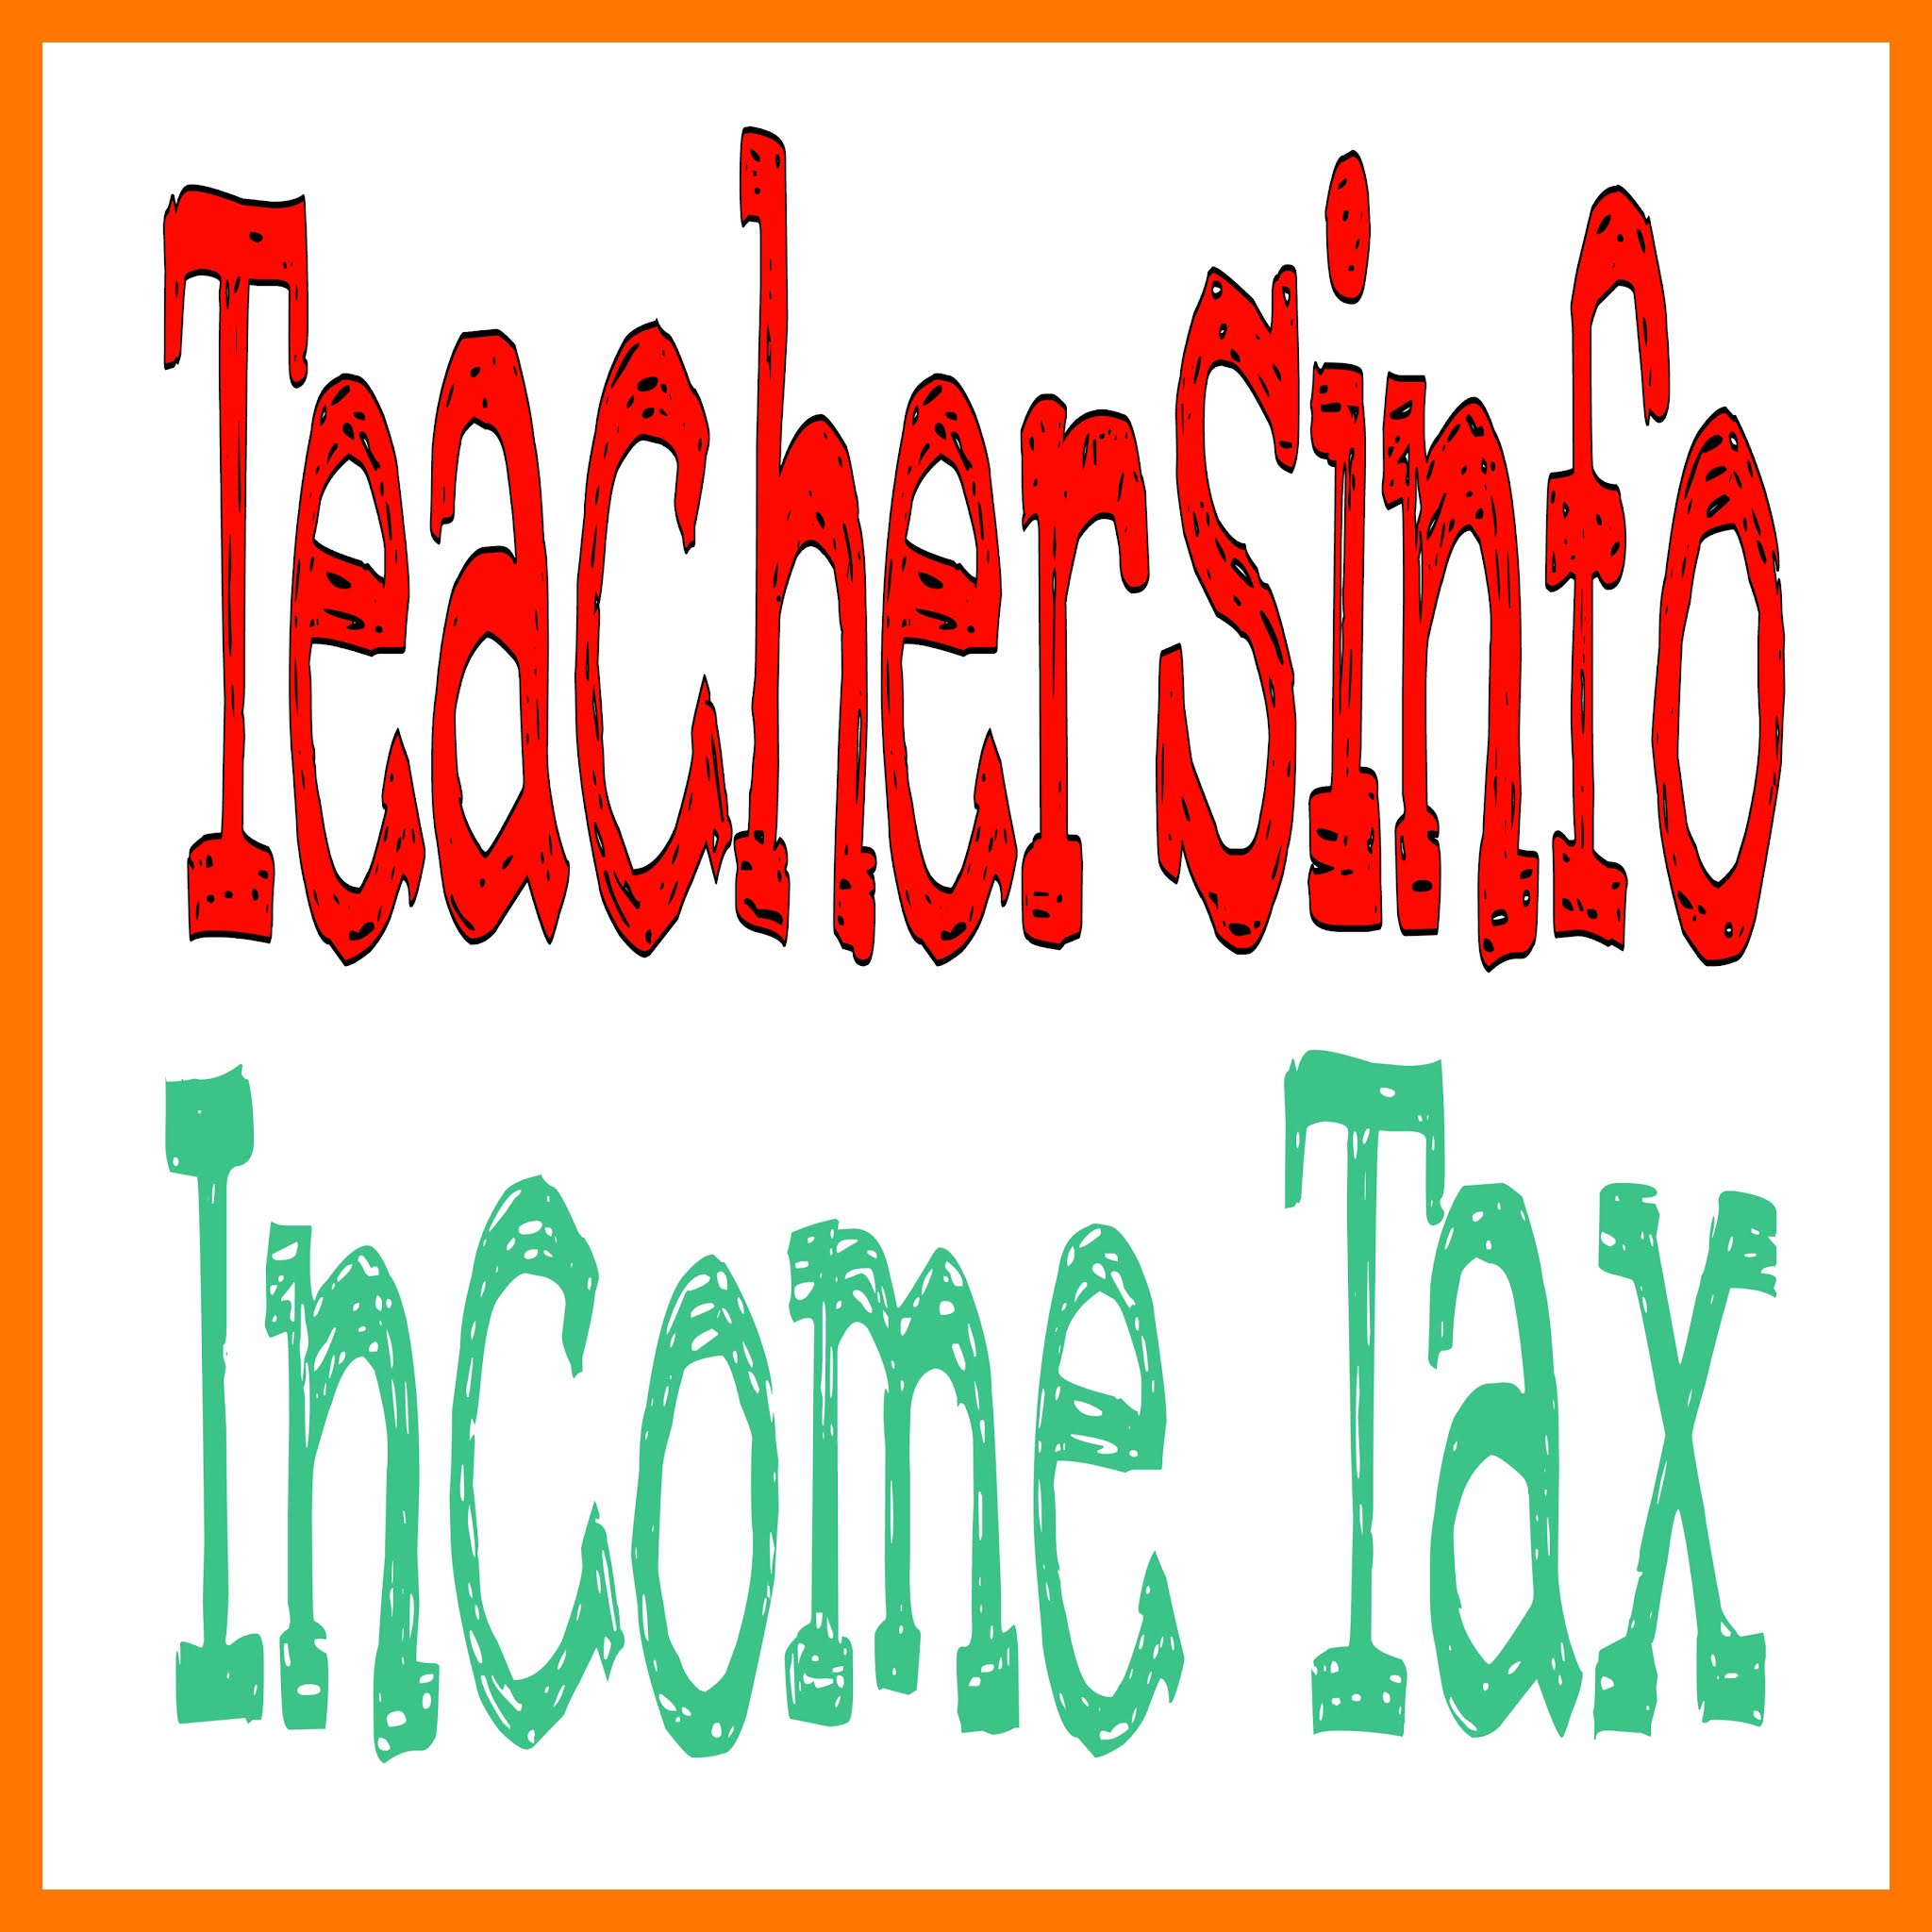 ts-employees-advance-income-tax-2021-22-online-calculator